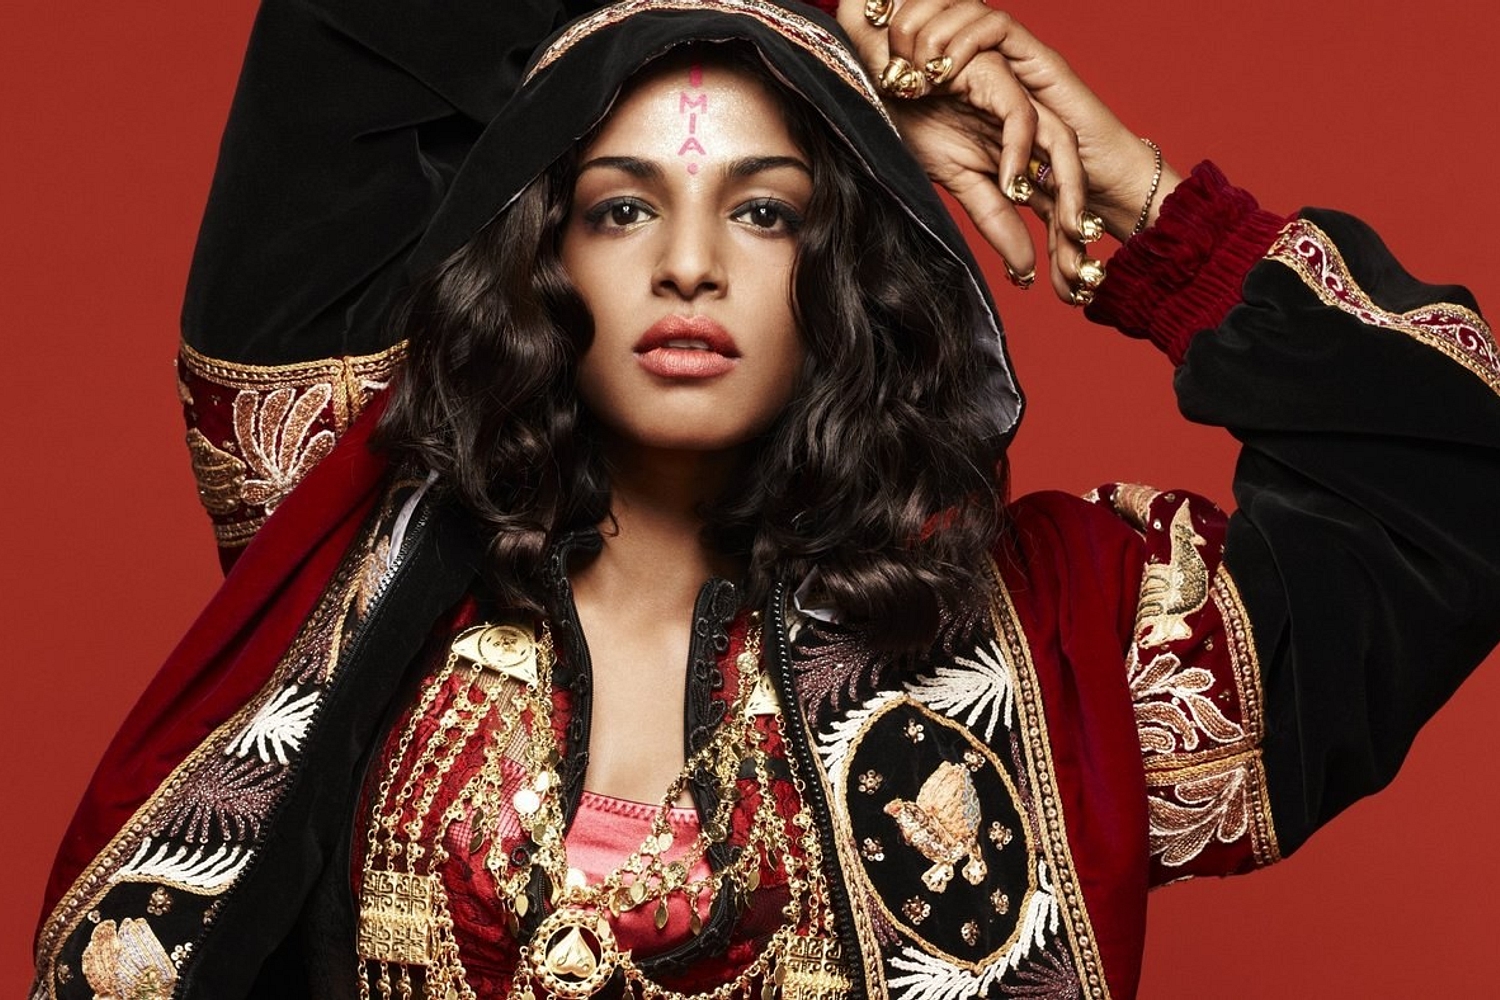 The trailer for the M.I.A’s new documentary is here